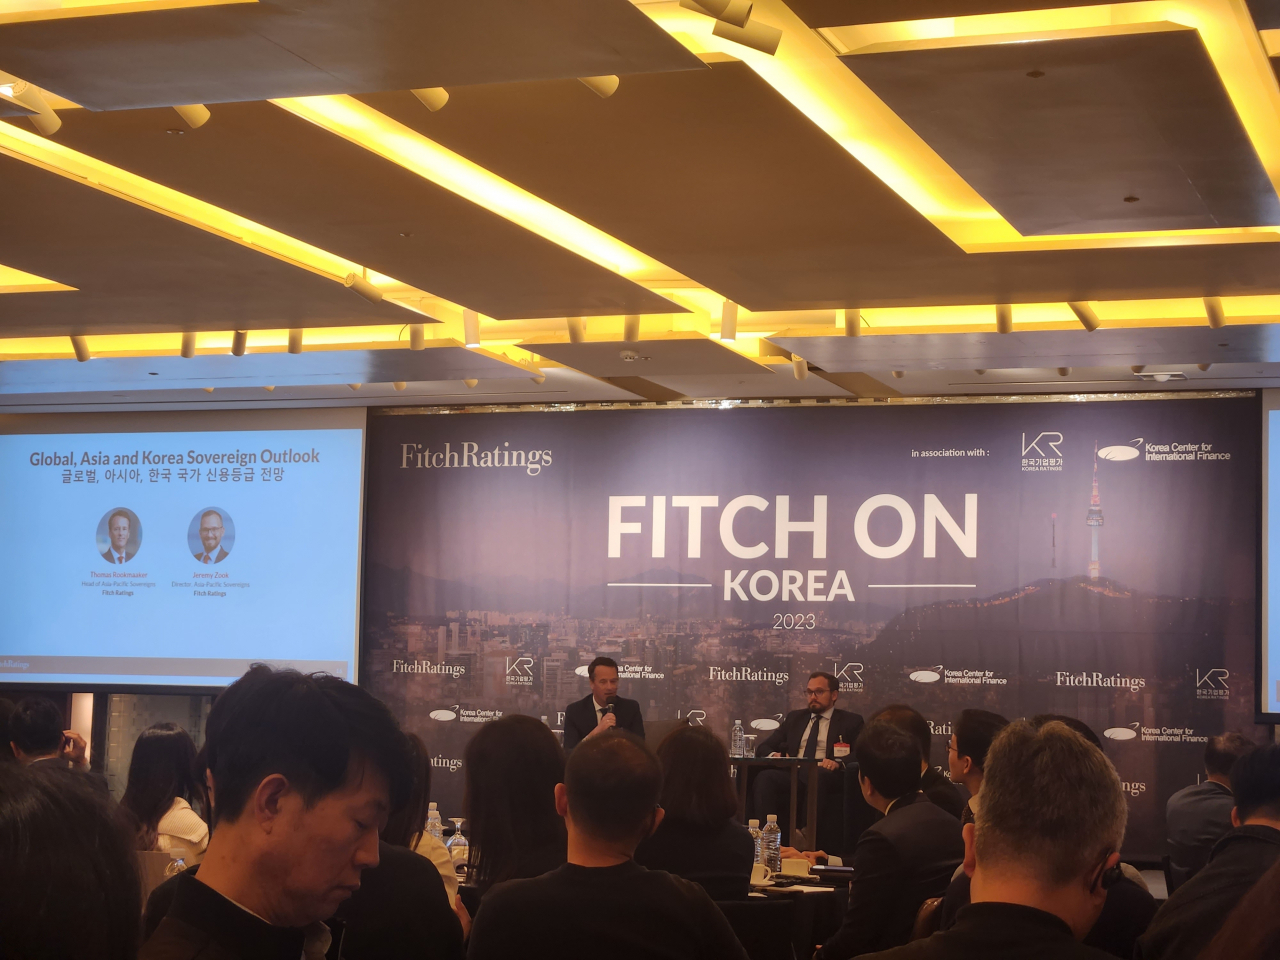 2023 Fitch on Korea seminar held in Seoul on Friday (Song Seung-hyun/The Korea Herald)